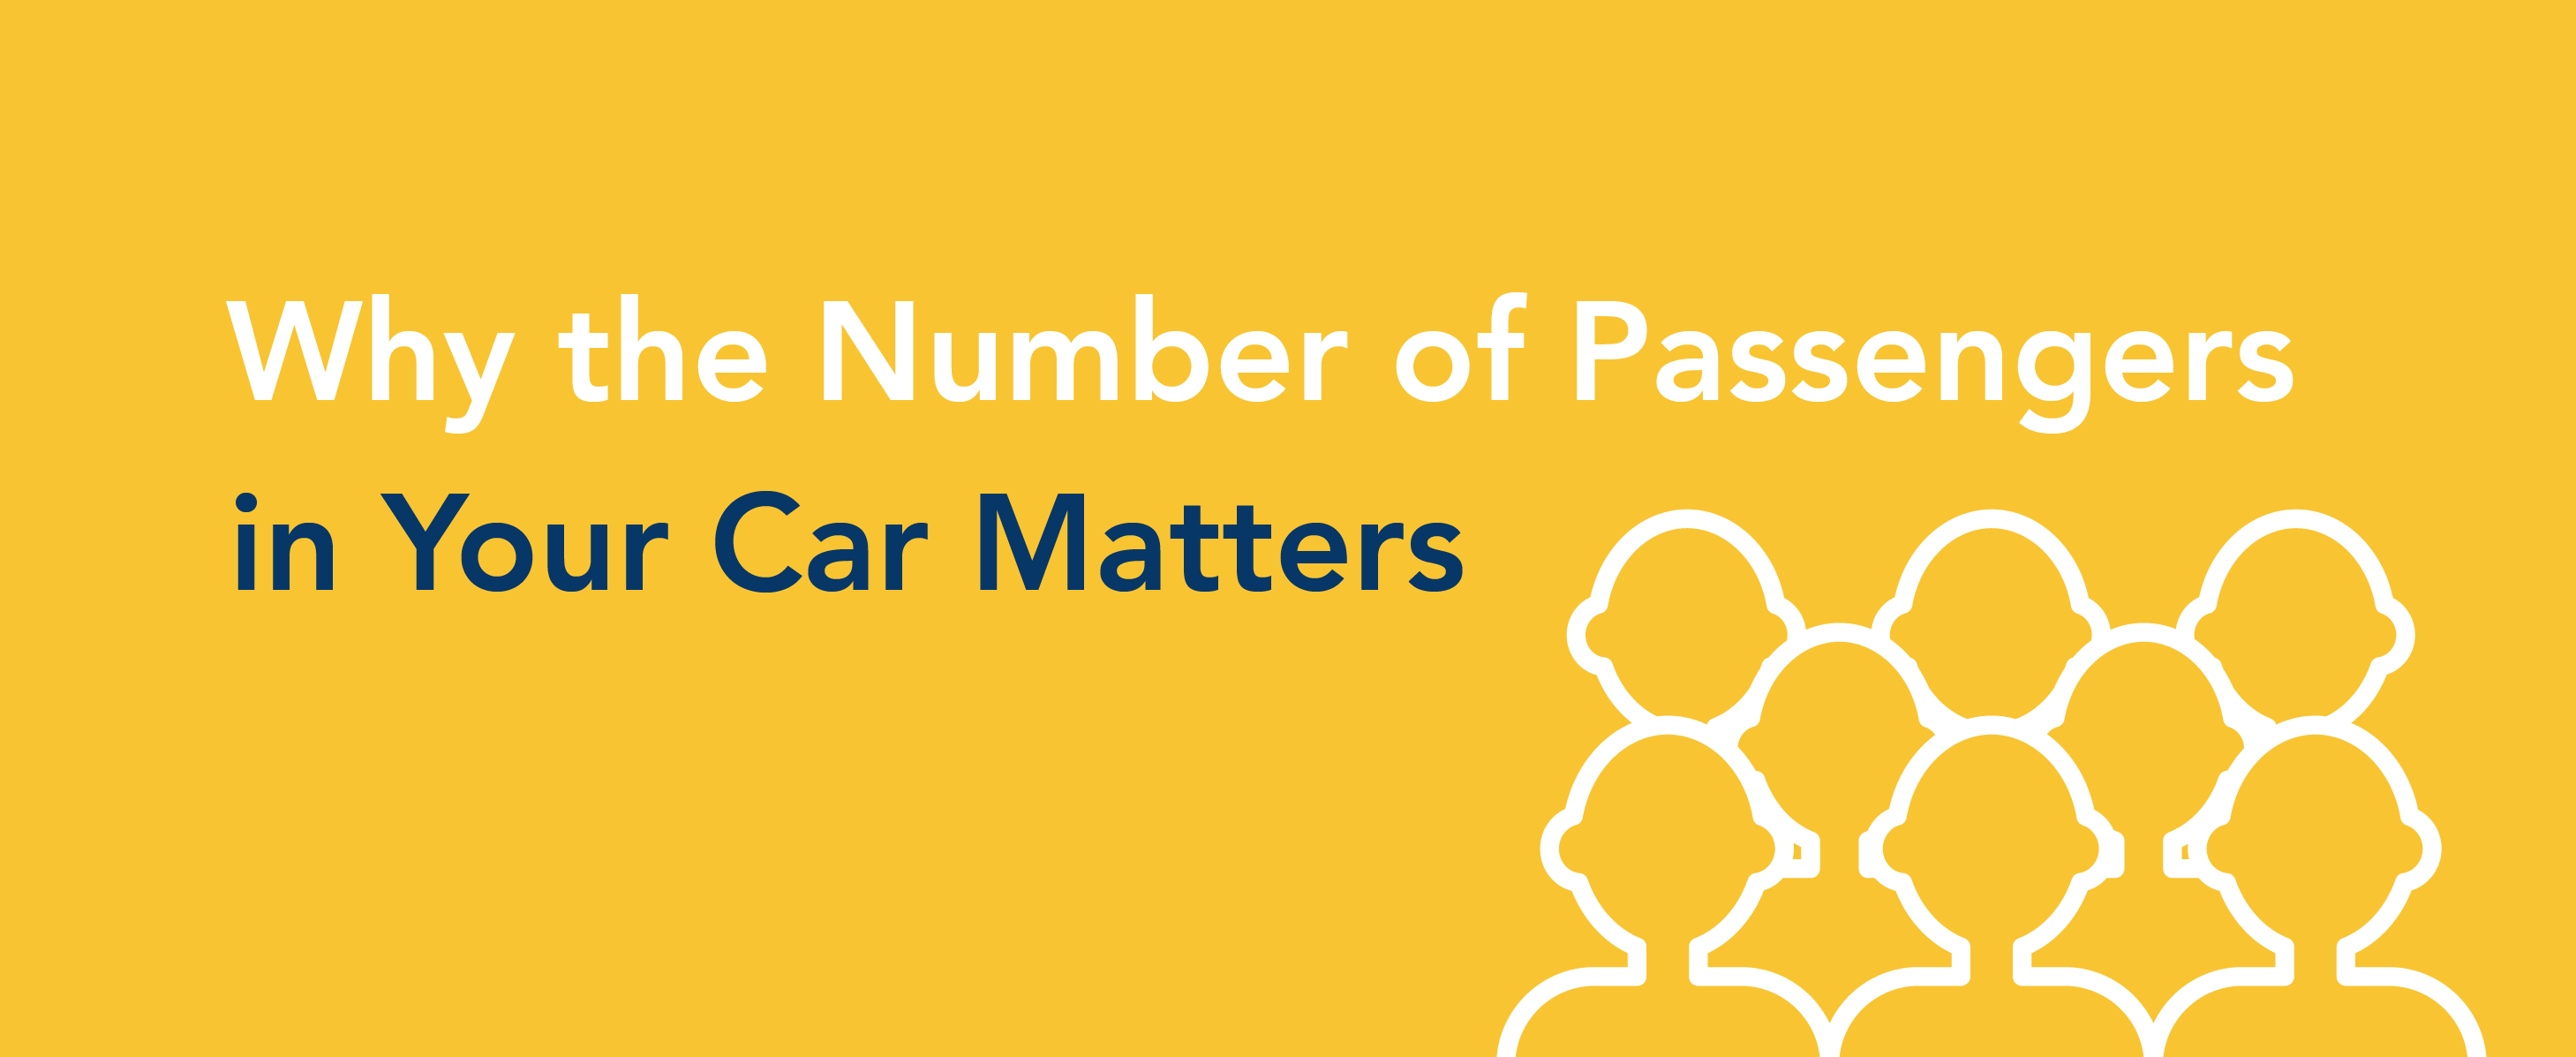 Why the number of passengers in your car matters.